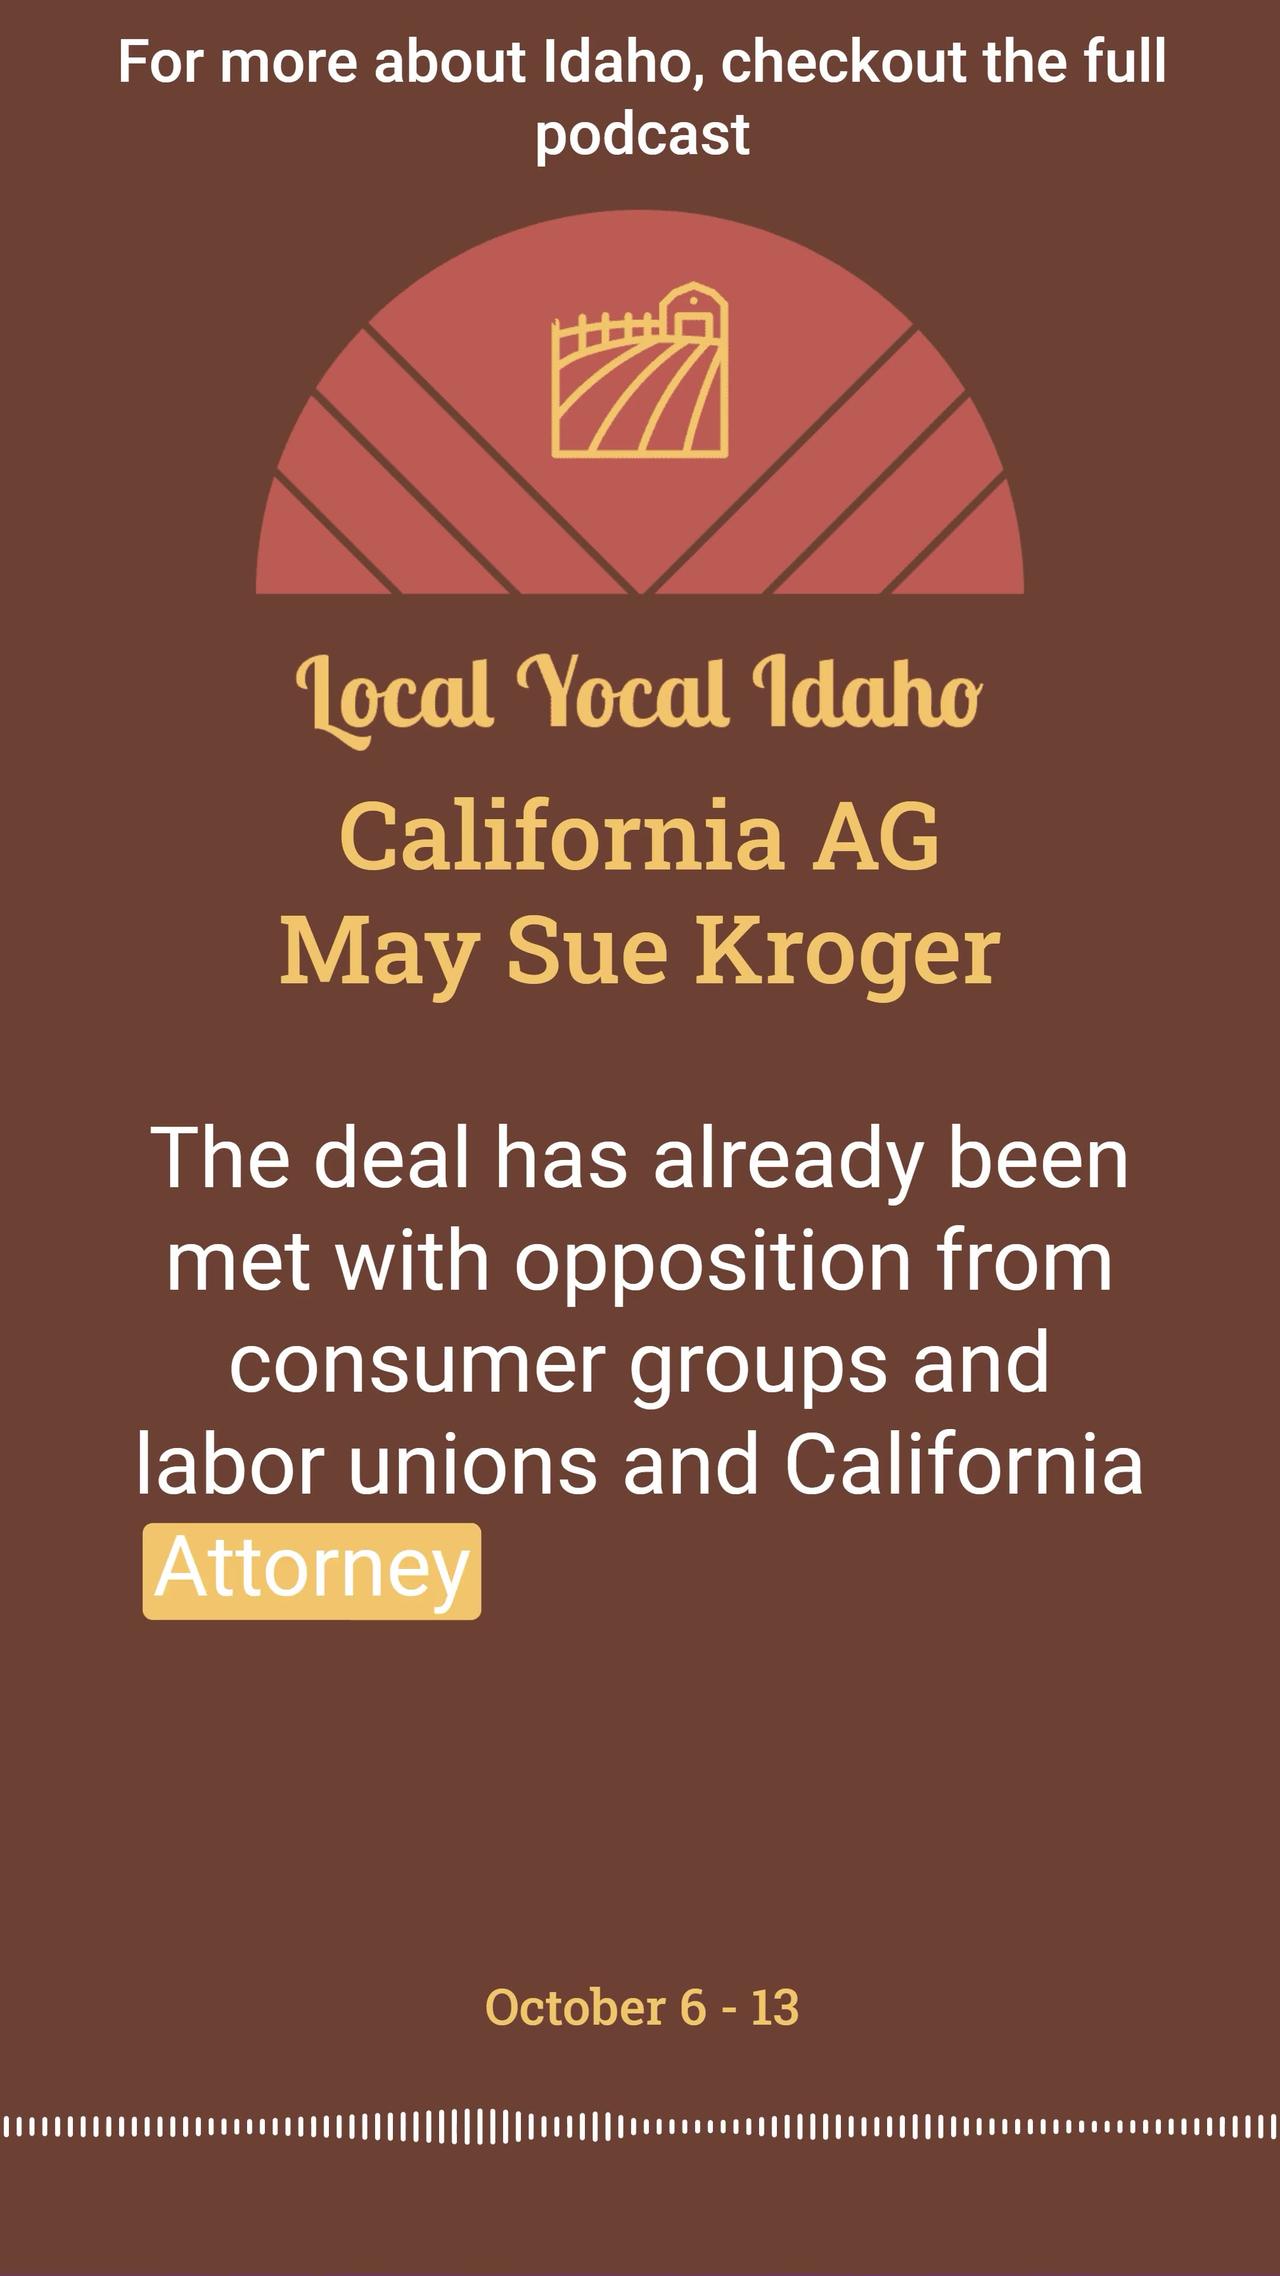 California AG May Sue Kroger to Block Albertsons Acquisition